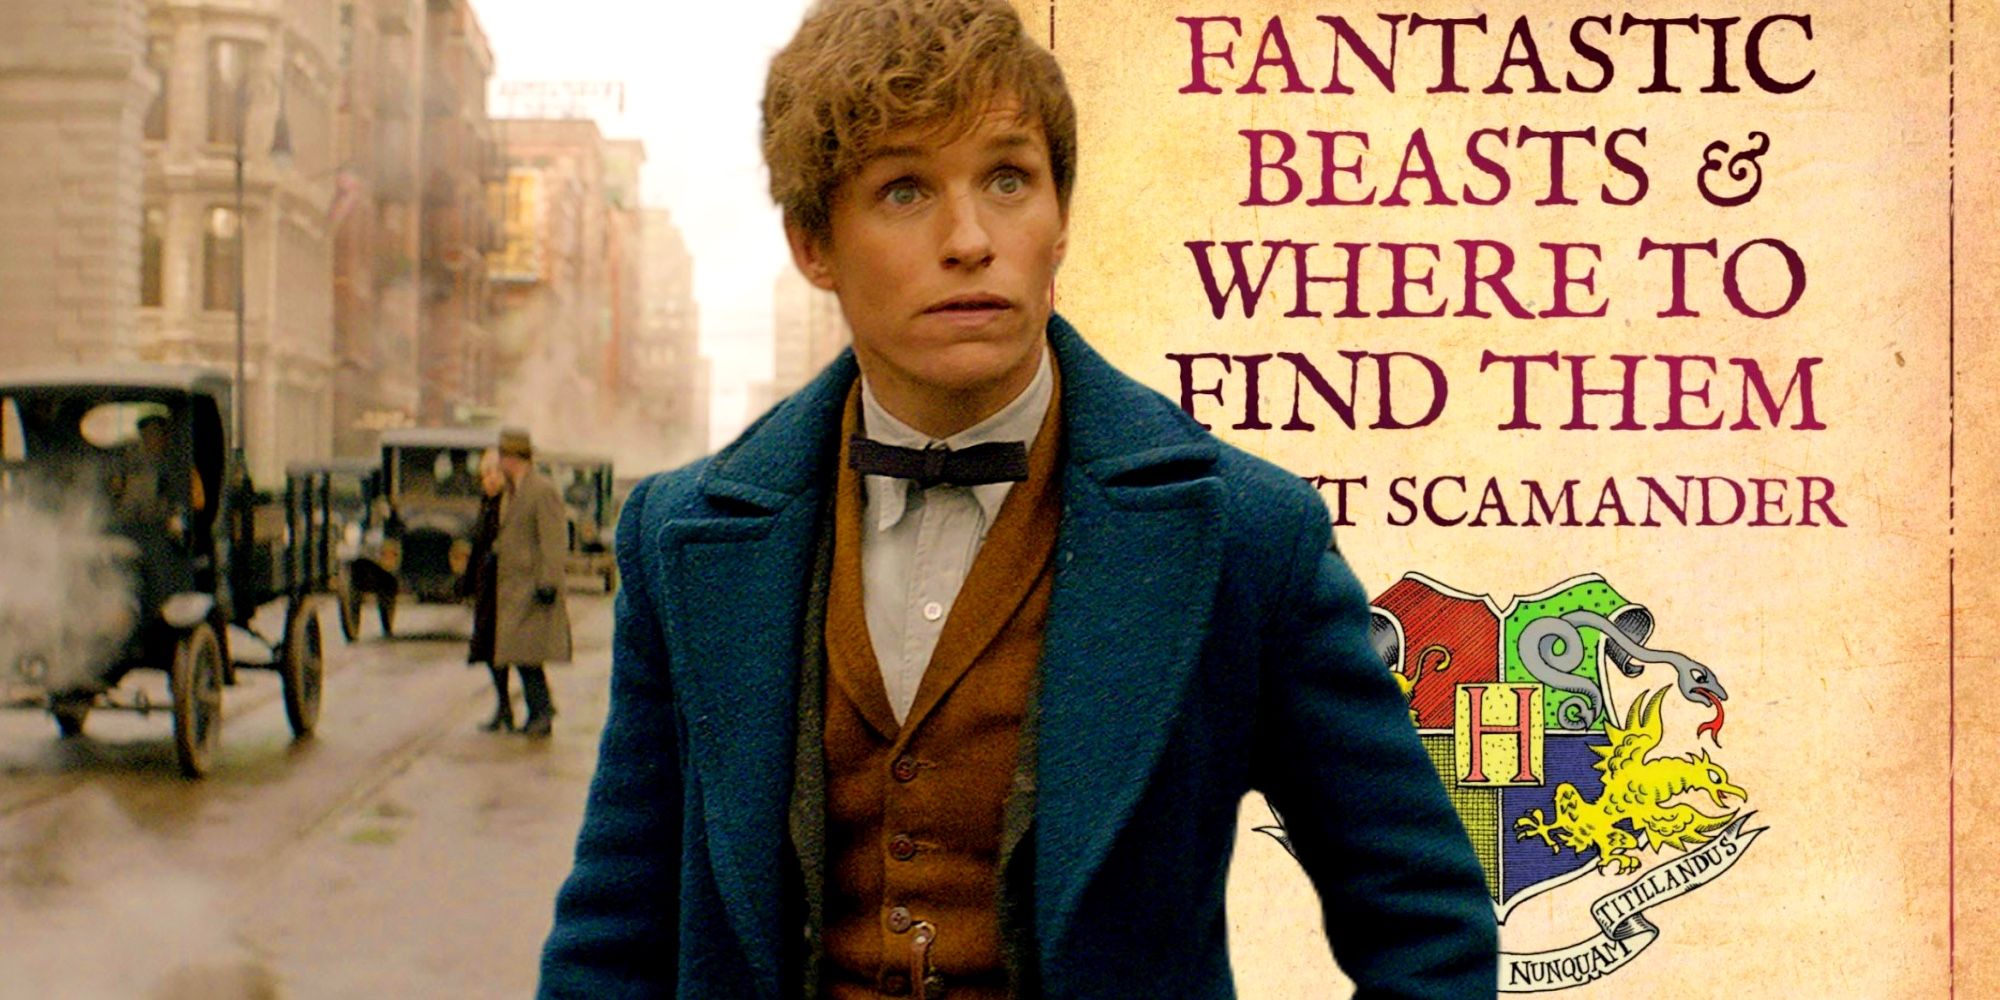 How Many Fantastic Beasts Books Are There